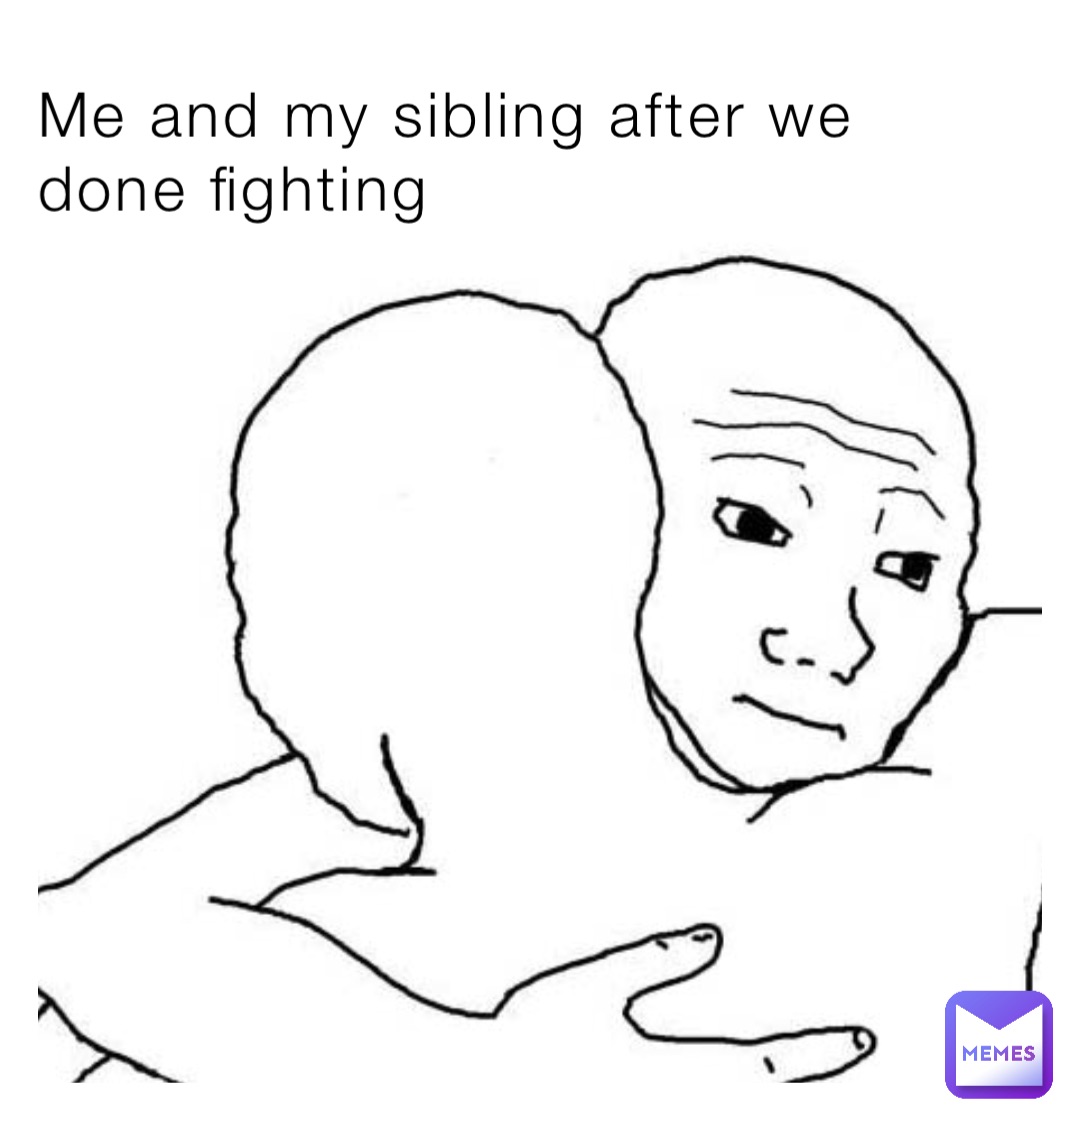 Me and my sibling after we done fighting